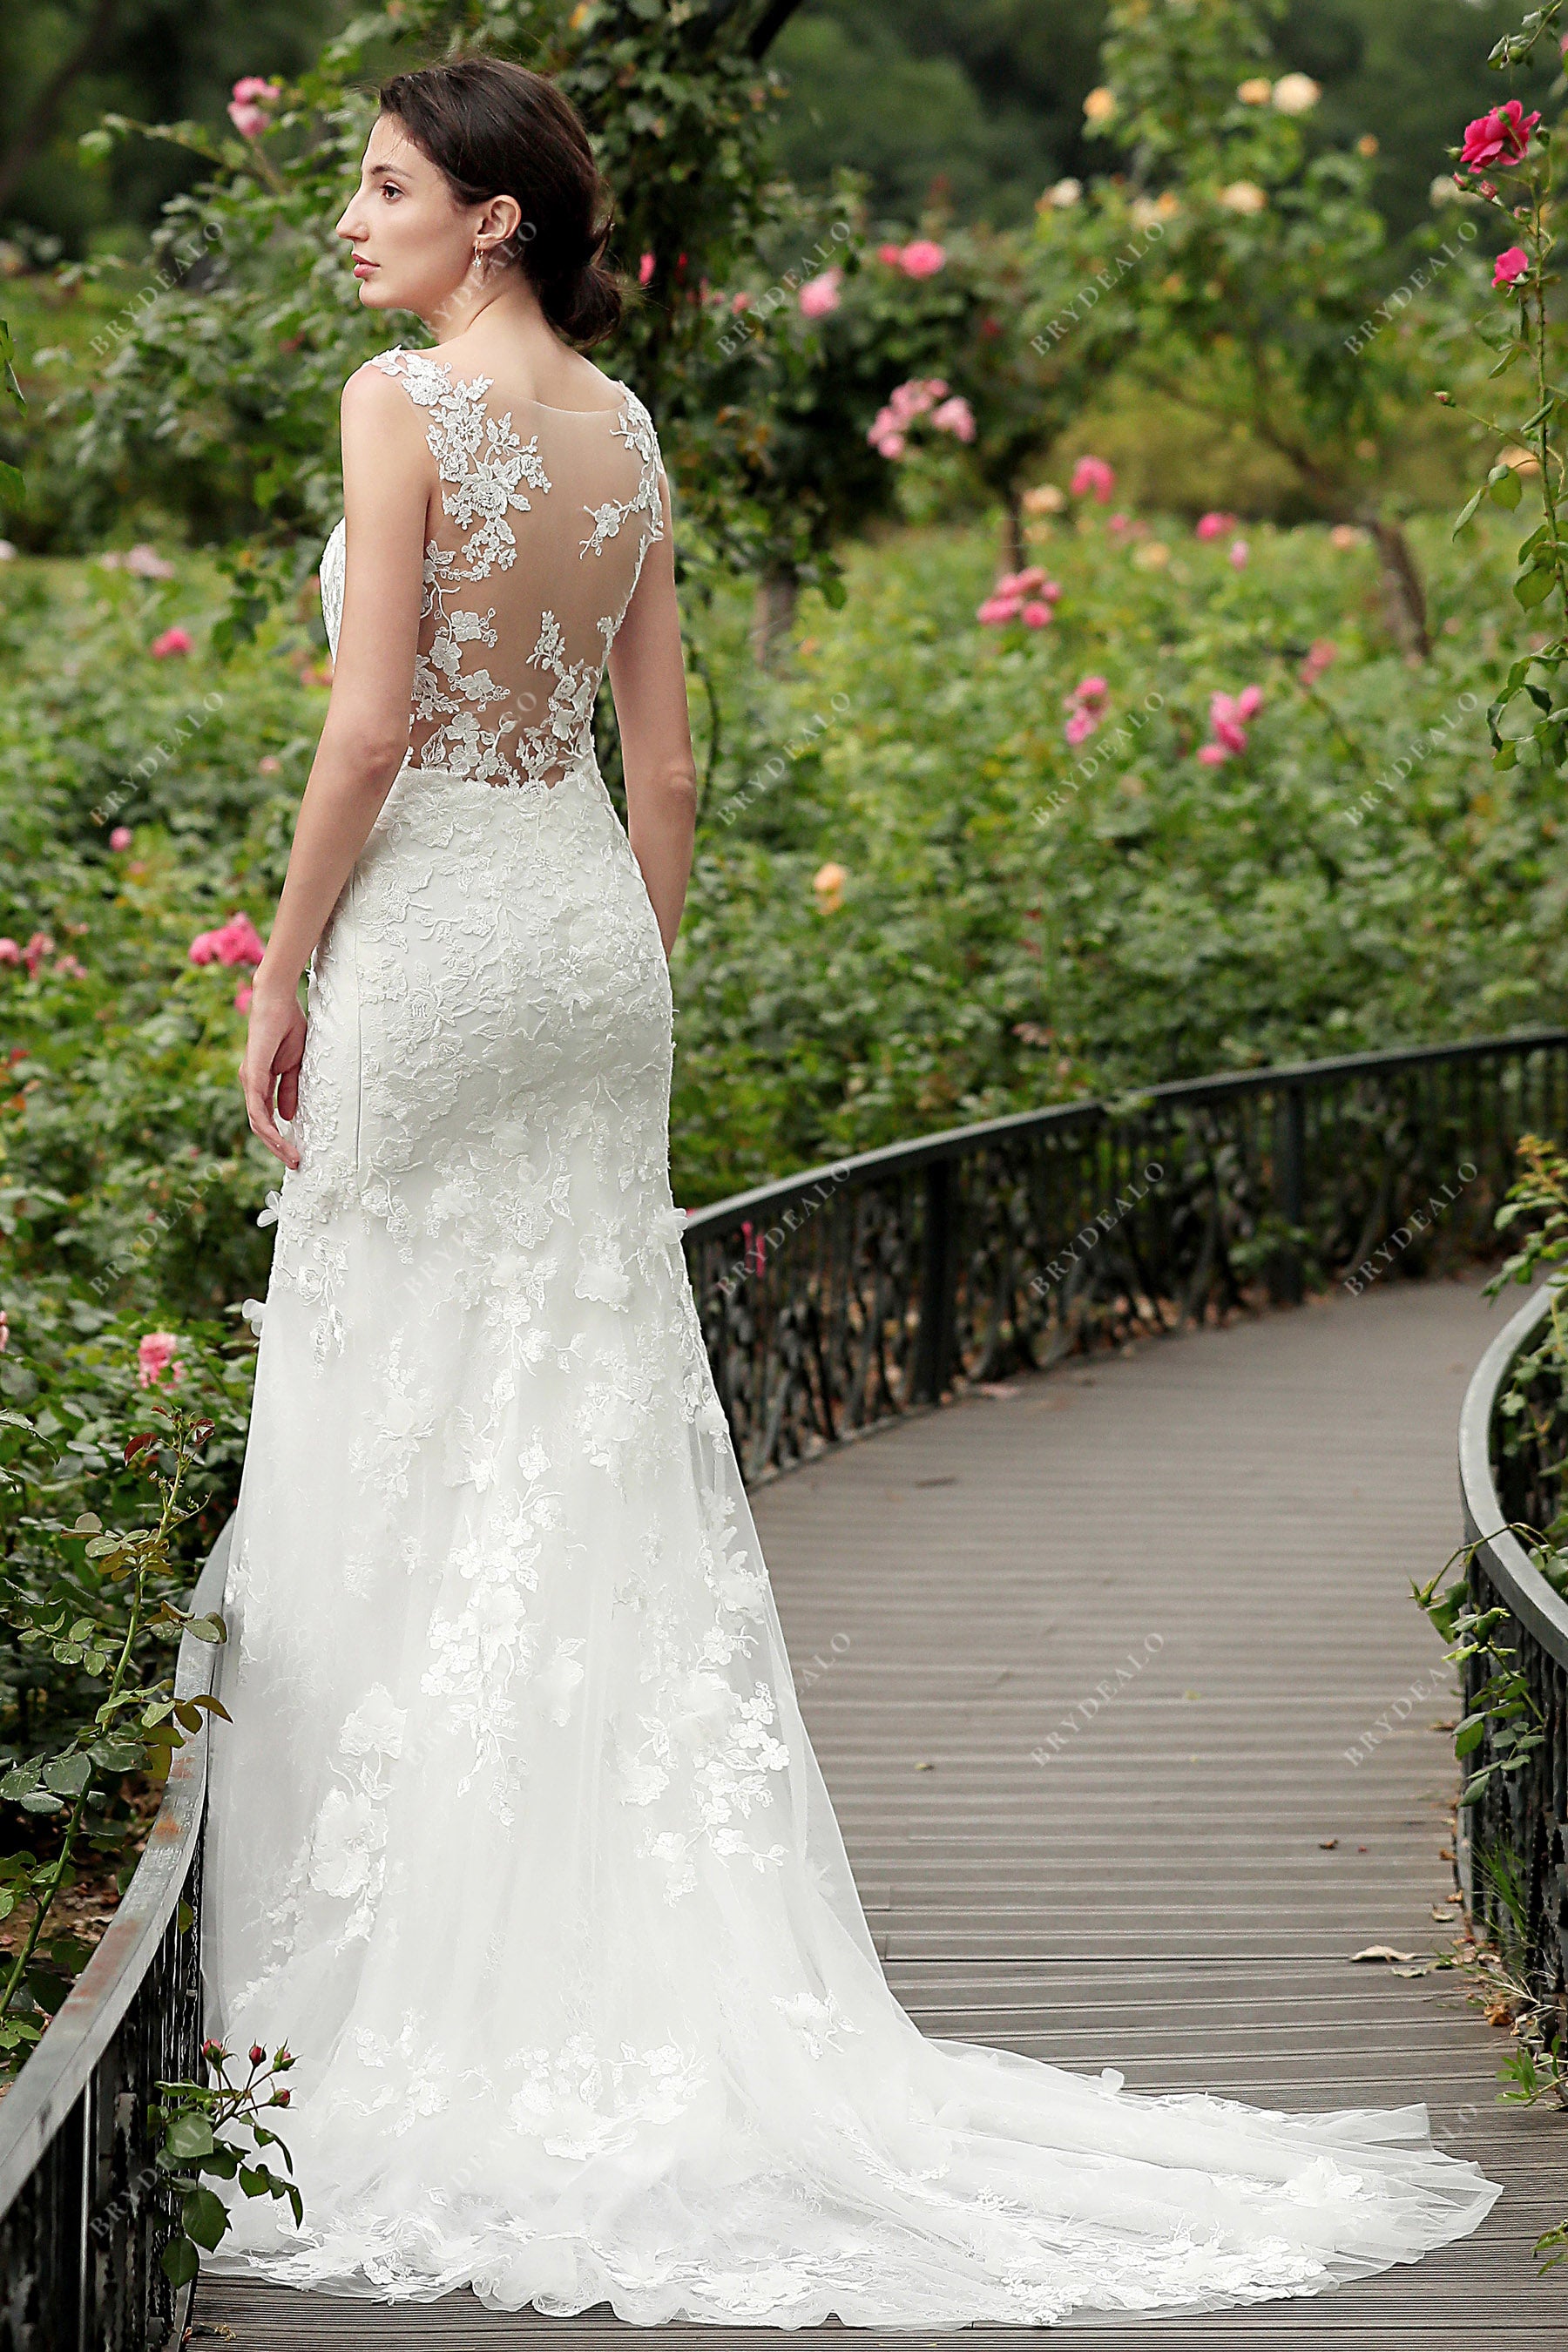 Illusion Back 3D Floral Lace Mermaid Wedding Gown